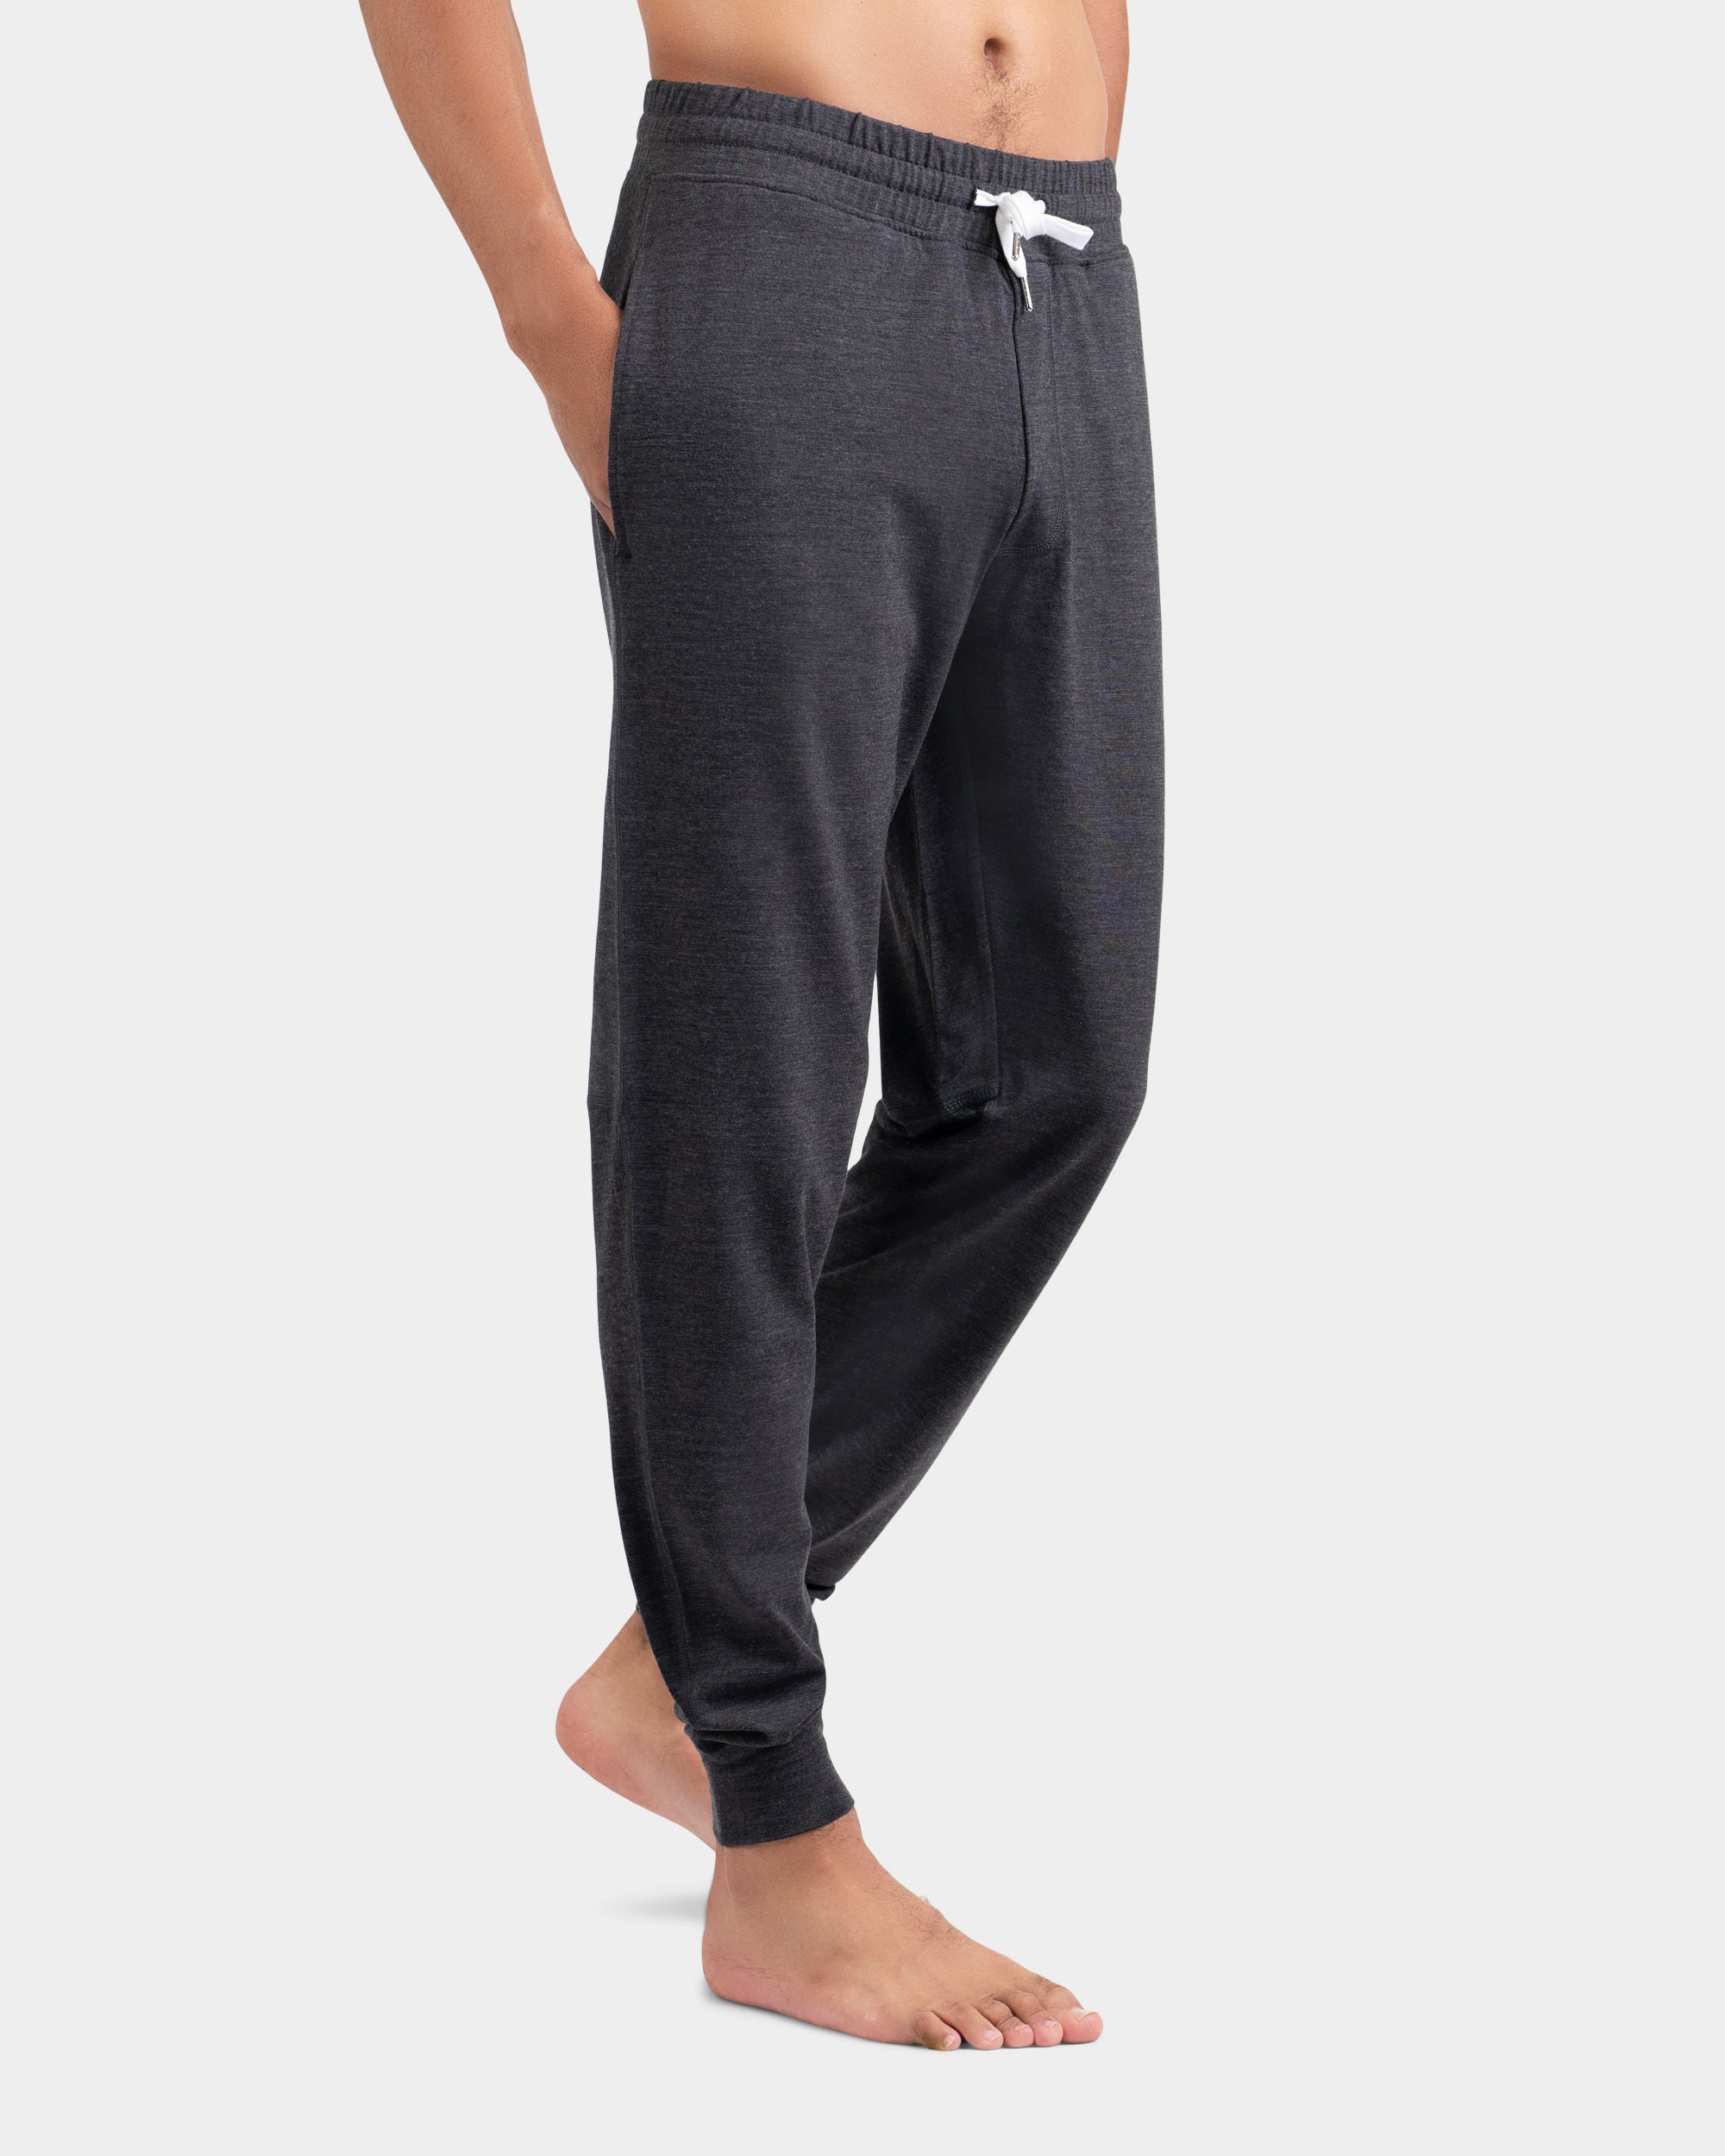  Woolly Clothing Men's Merino Wool Jogger Sweatpant - Wicking  Breathable Anti-Odor - Black - S : Clothing, Shoes & Jewelry